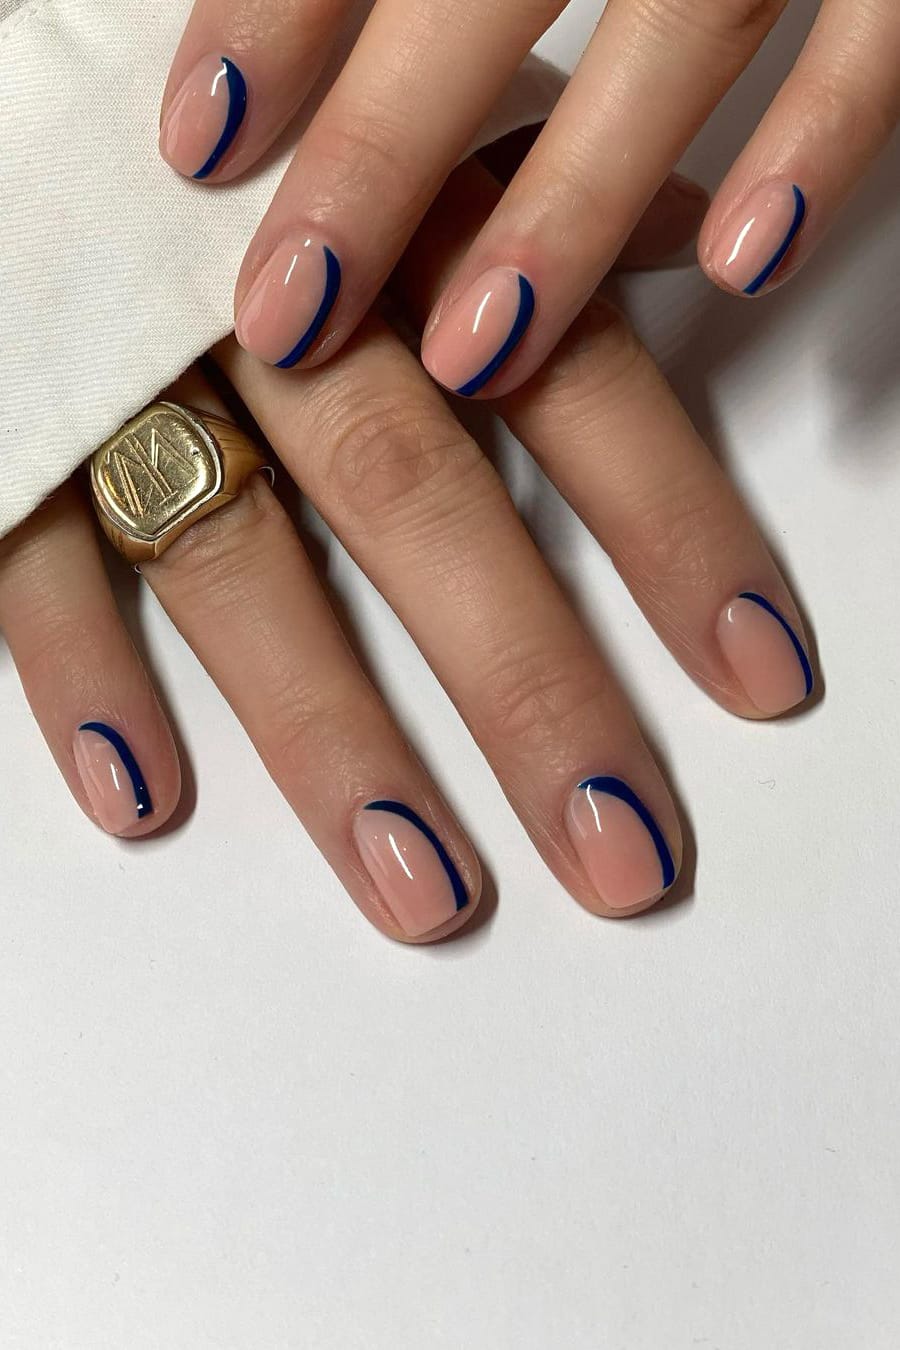 Nude and blue nails